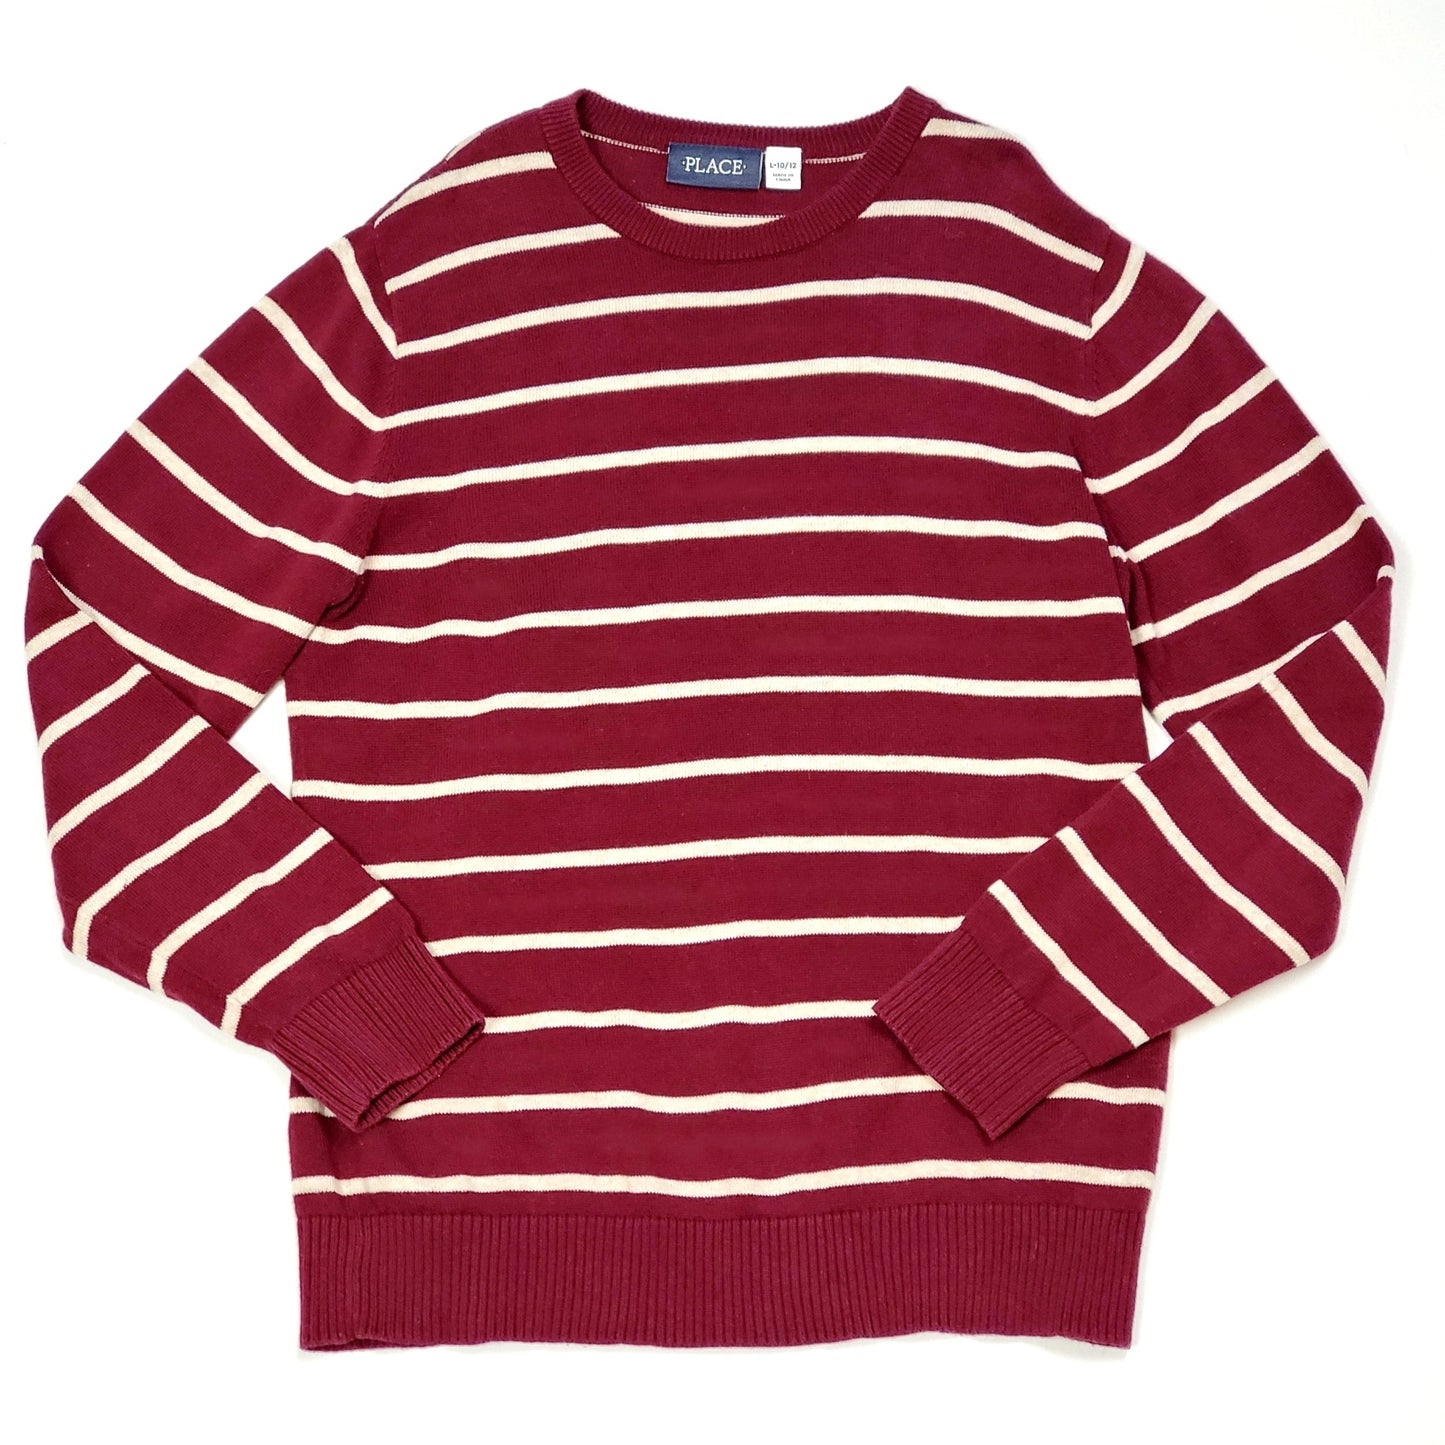 Childrens Place Maroon Striped Boys Sweater 10 Used View 1